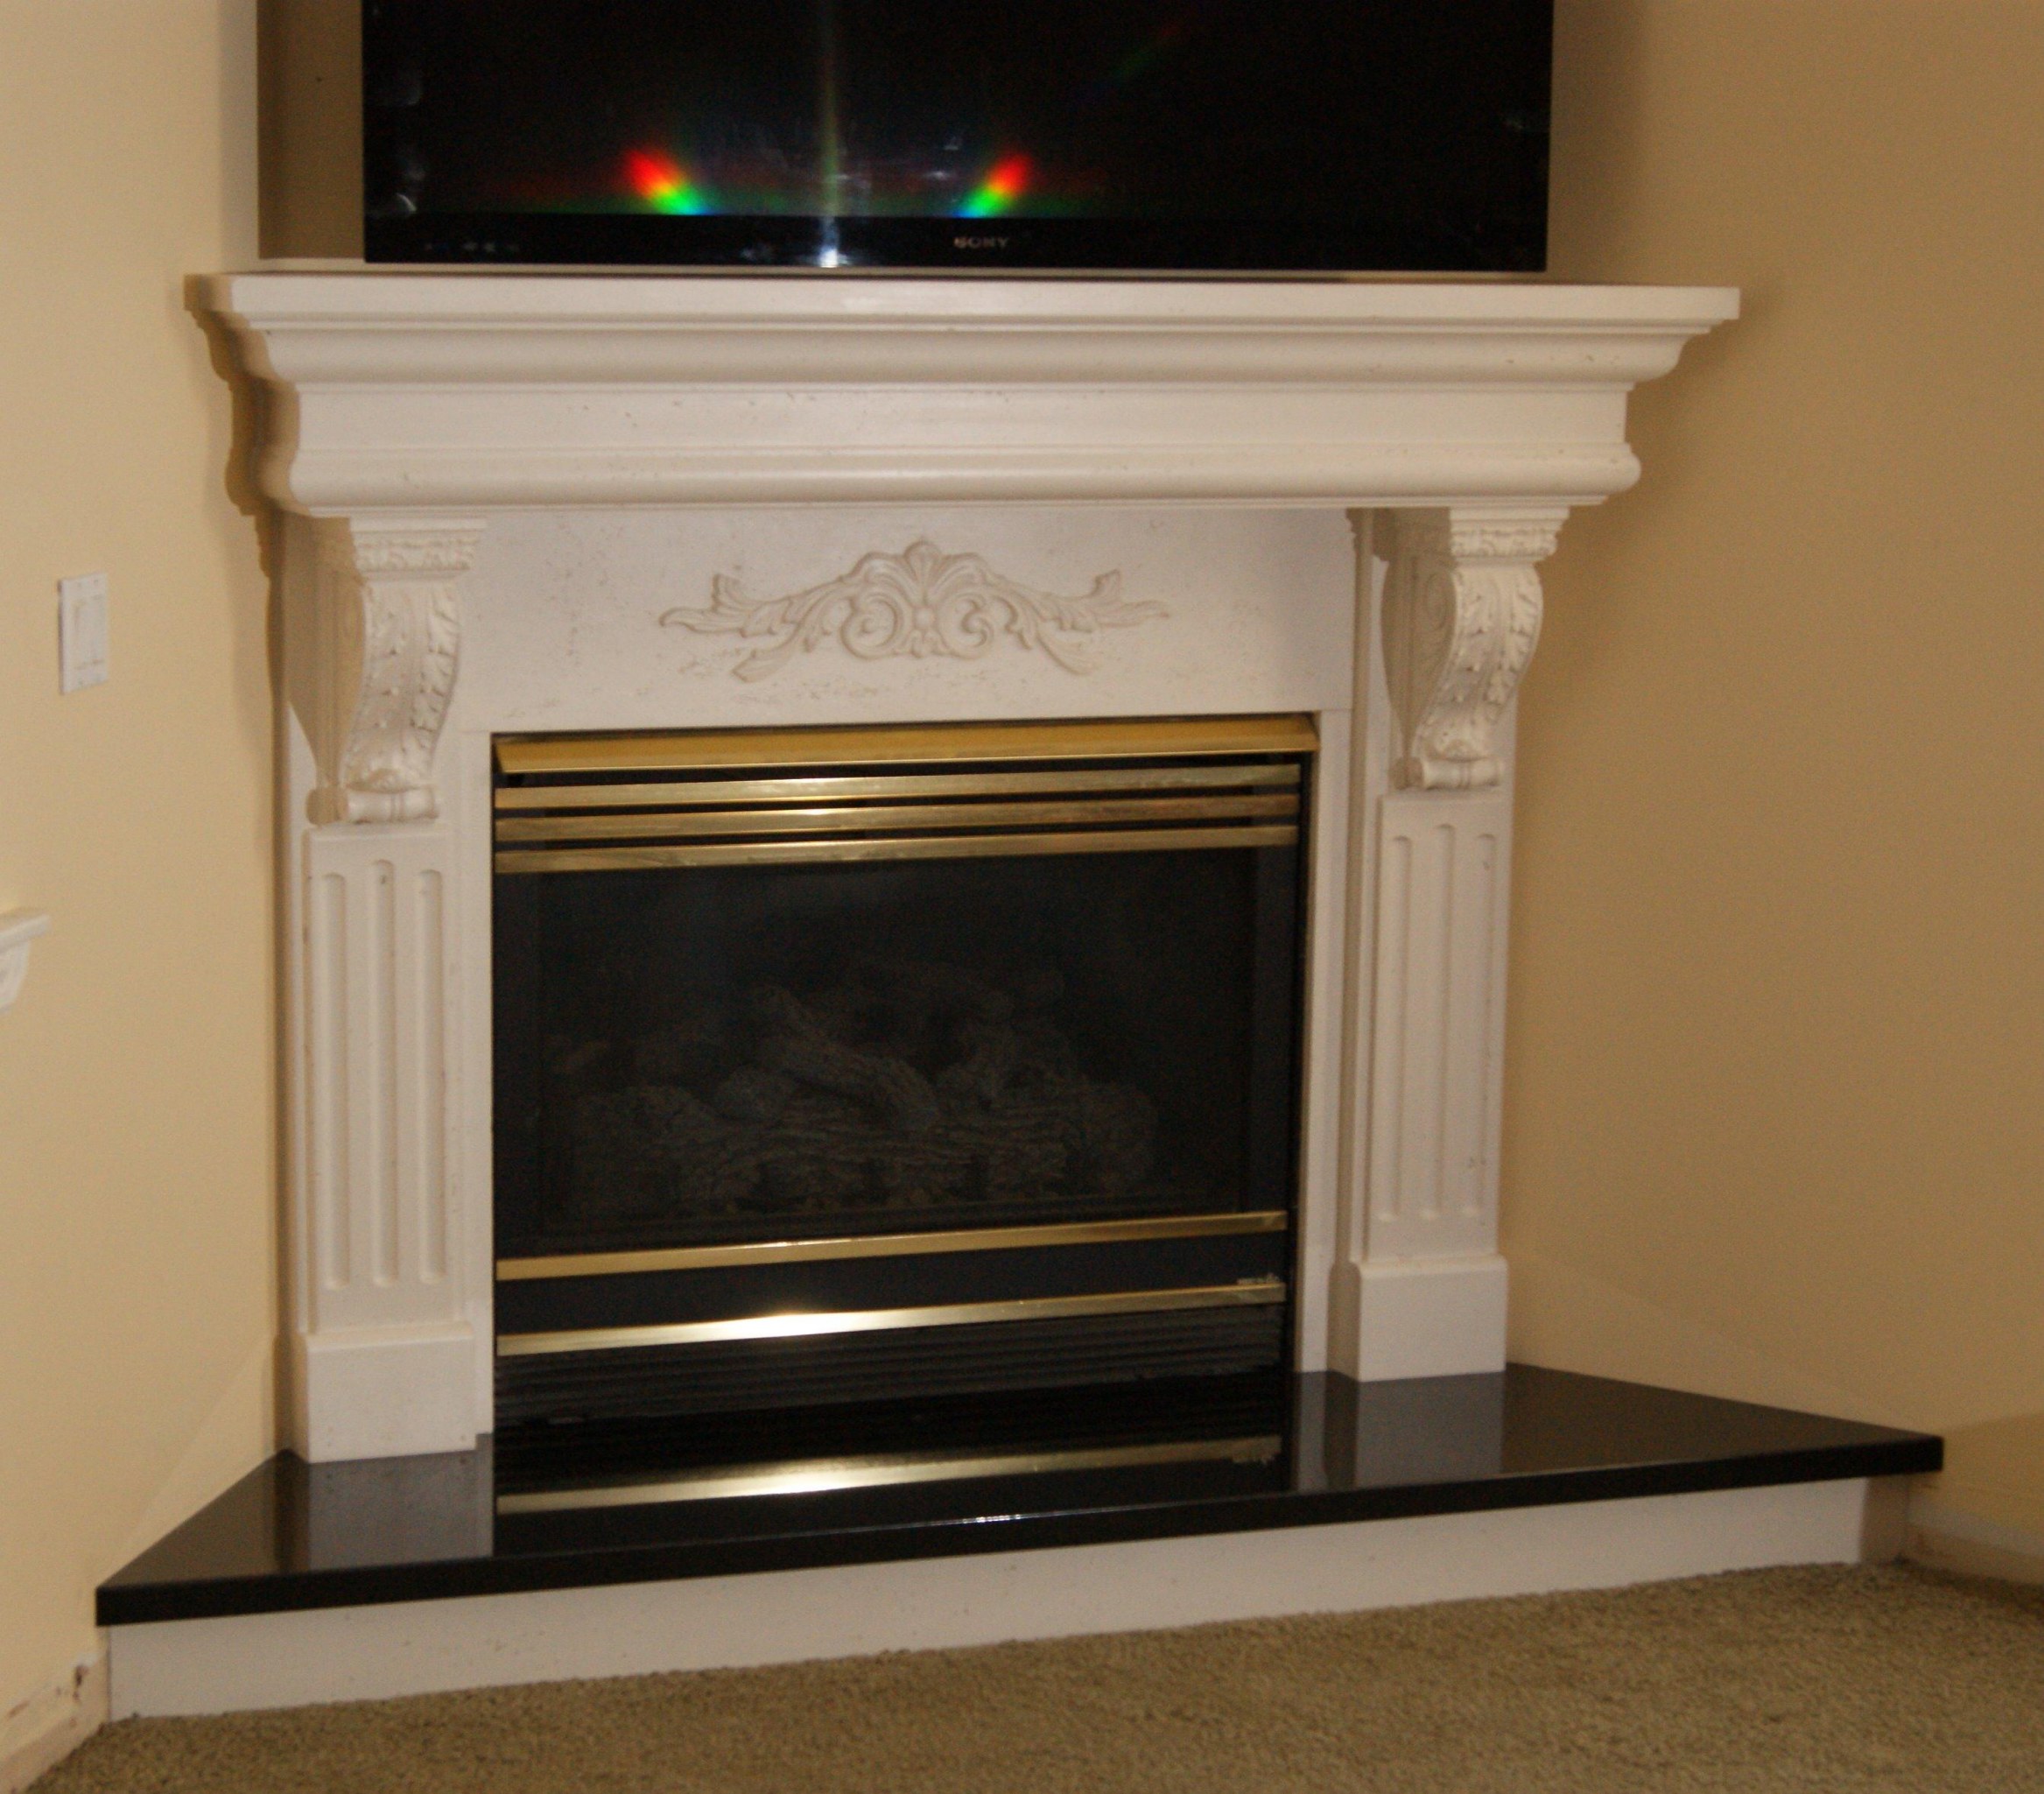 Floating Shelves by Fireplace Beautiful Fireplace Mantel Shelf Fireplace Mantels St George Utah